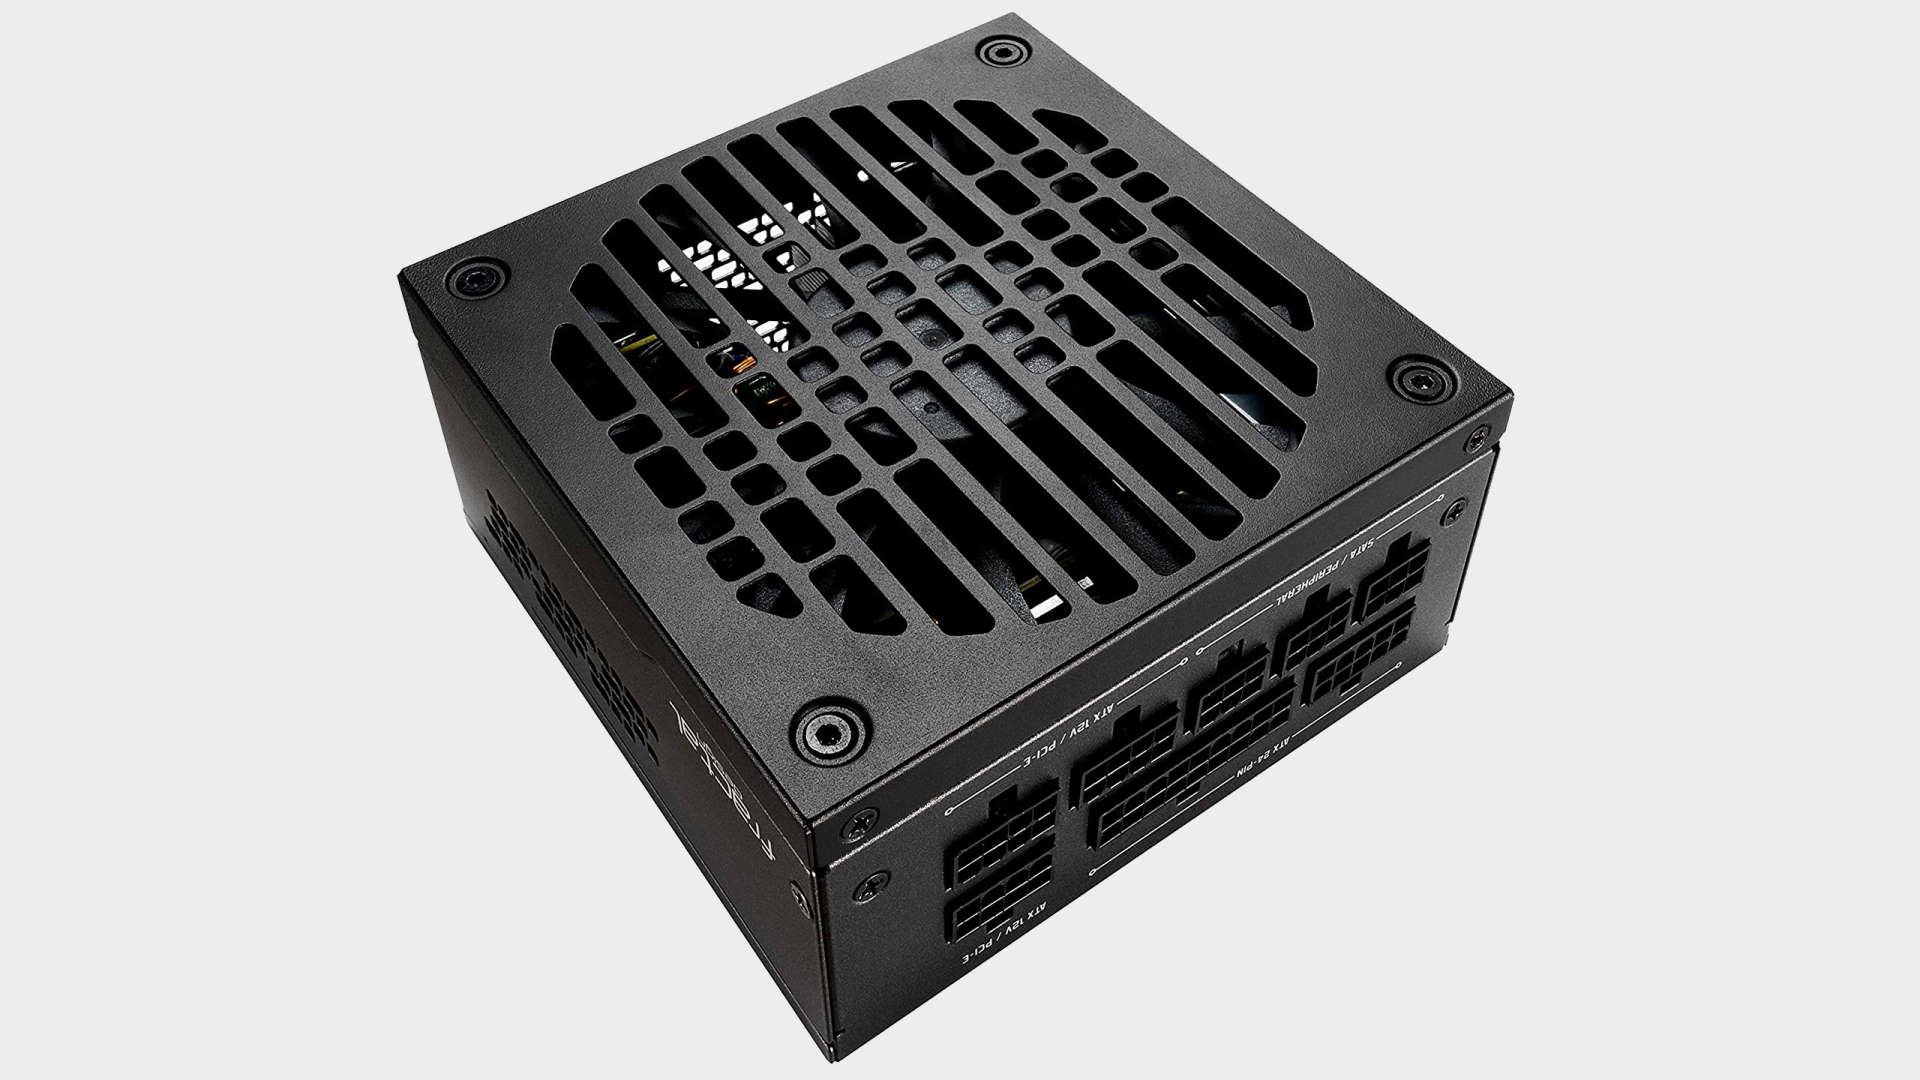 Image of the Fractal Design Ion SFX 650 Gold power supply on a grey background.